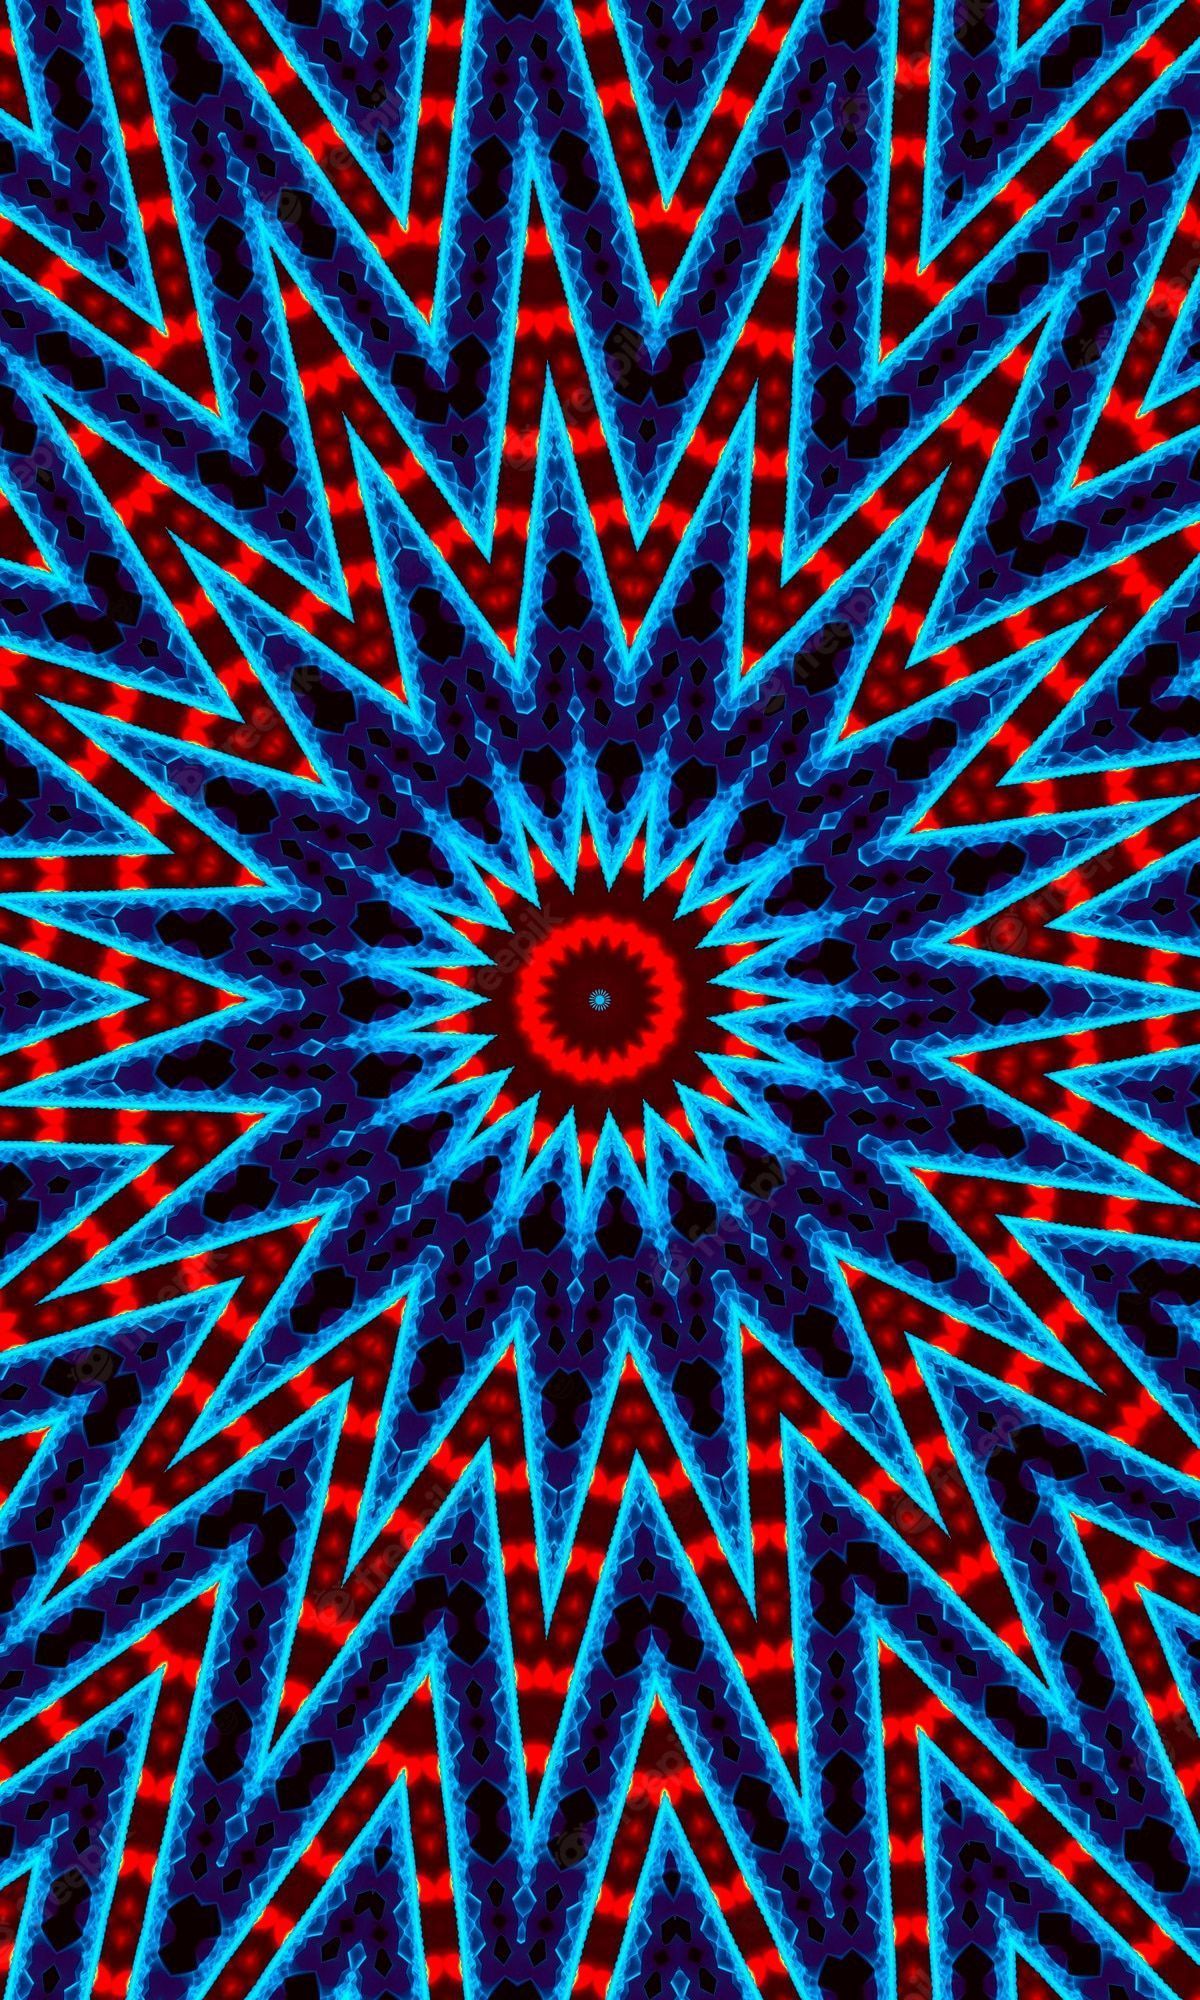 A blue and red kaleidoscope pattern - Low poly